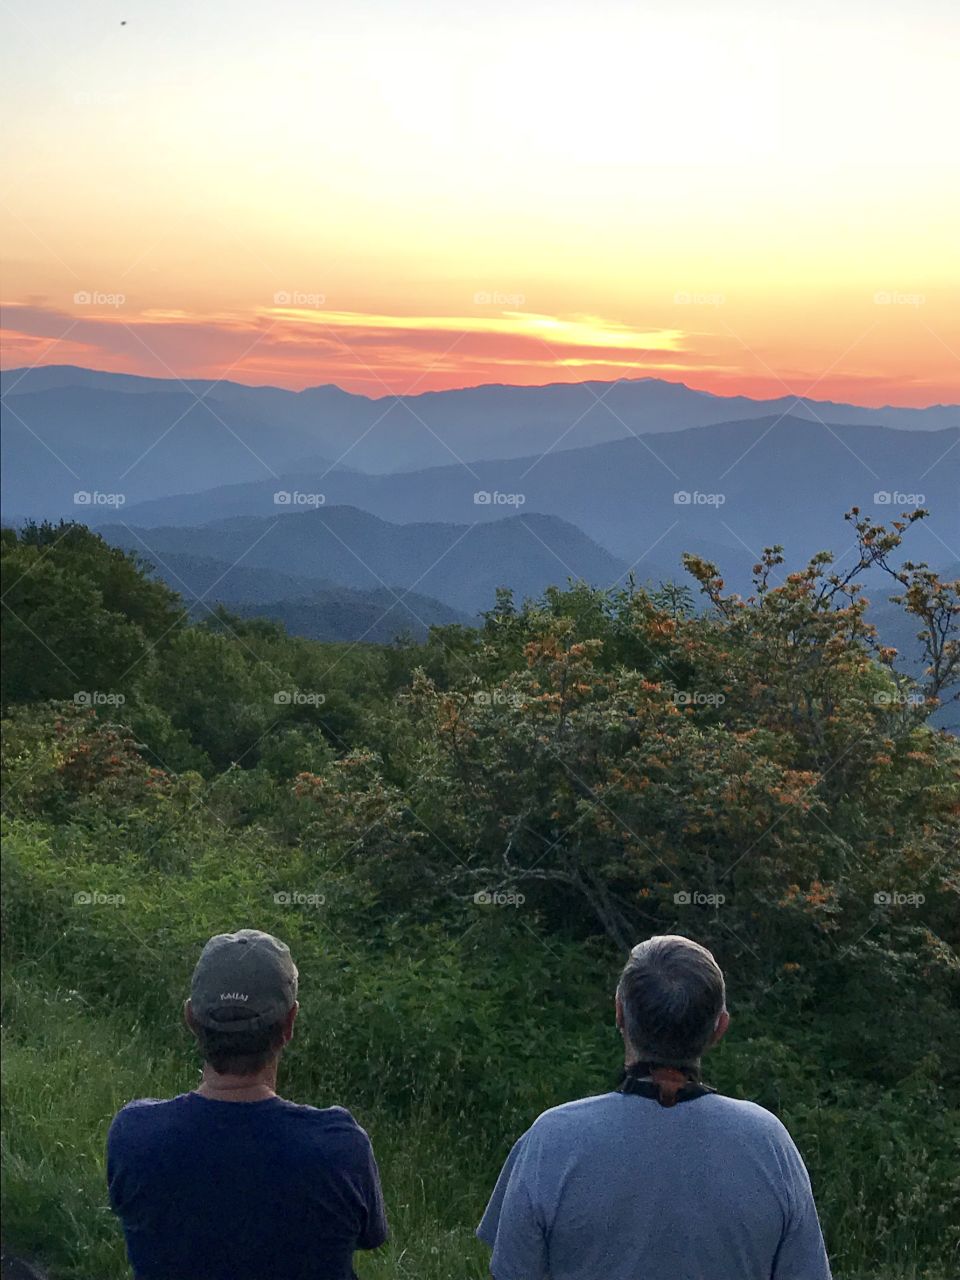 Watching the mountain sunset after driving up the parkway. 